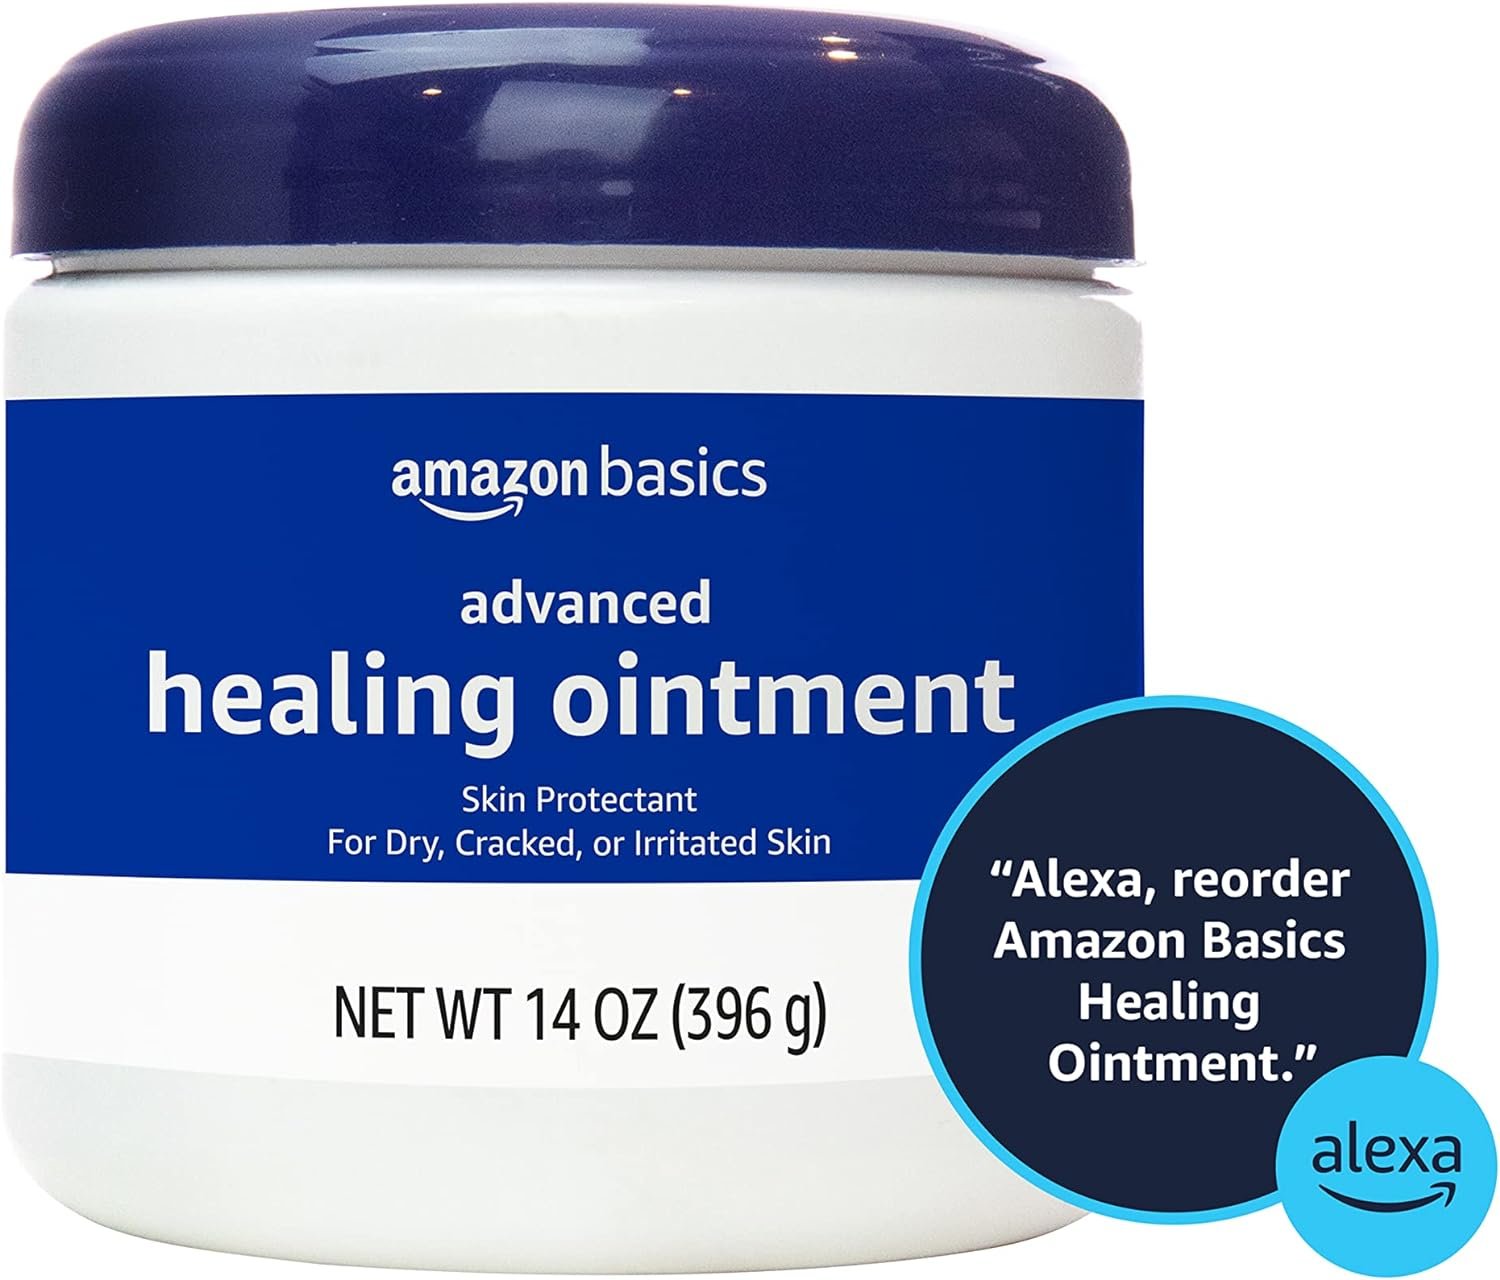 "Amazon Basics Healing Ointment: Your Weapon Against Winter Skin Challenges!"